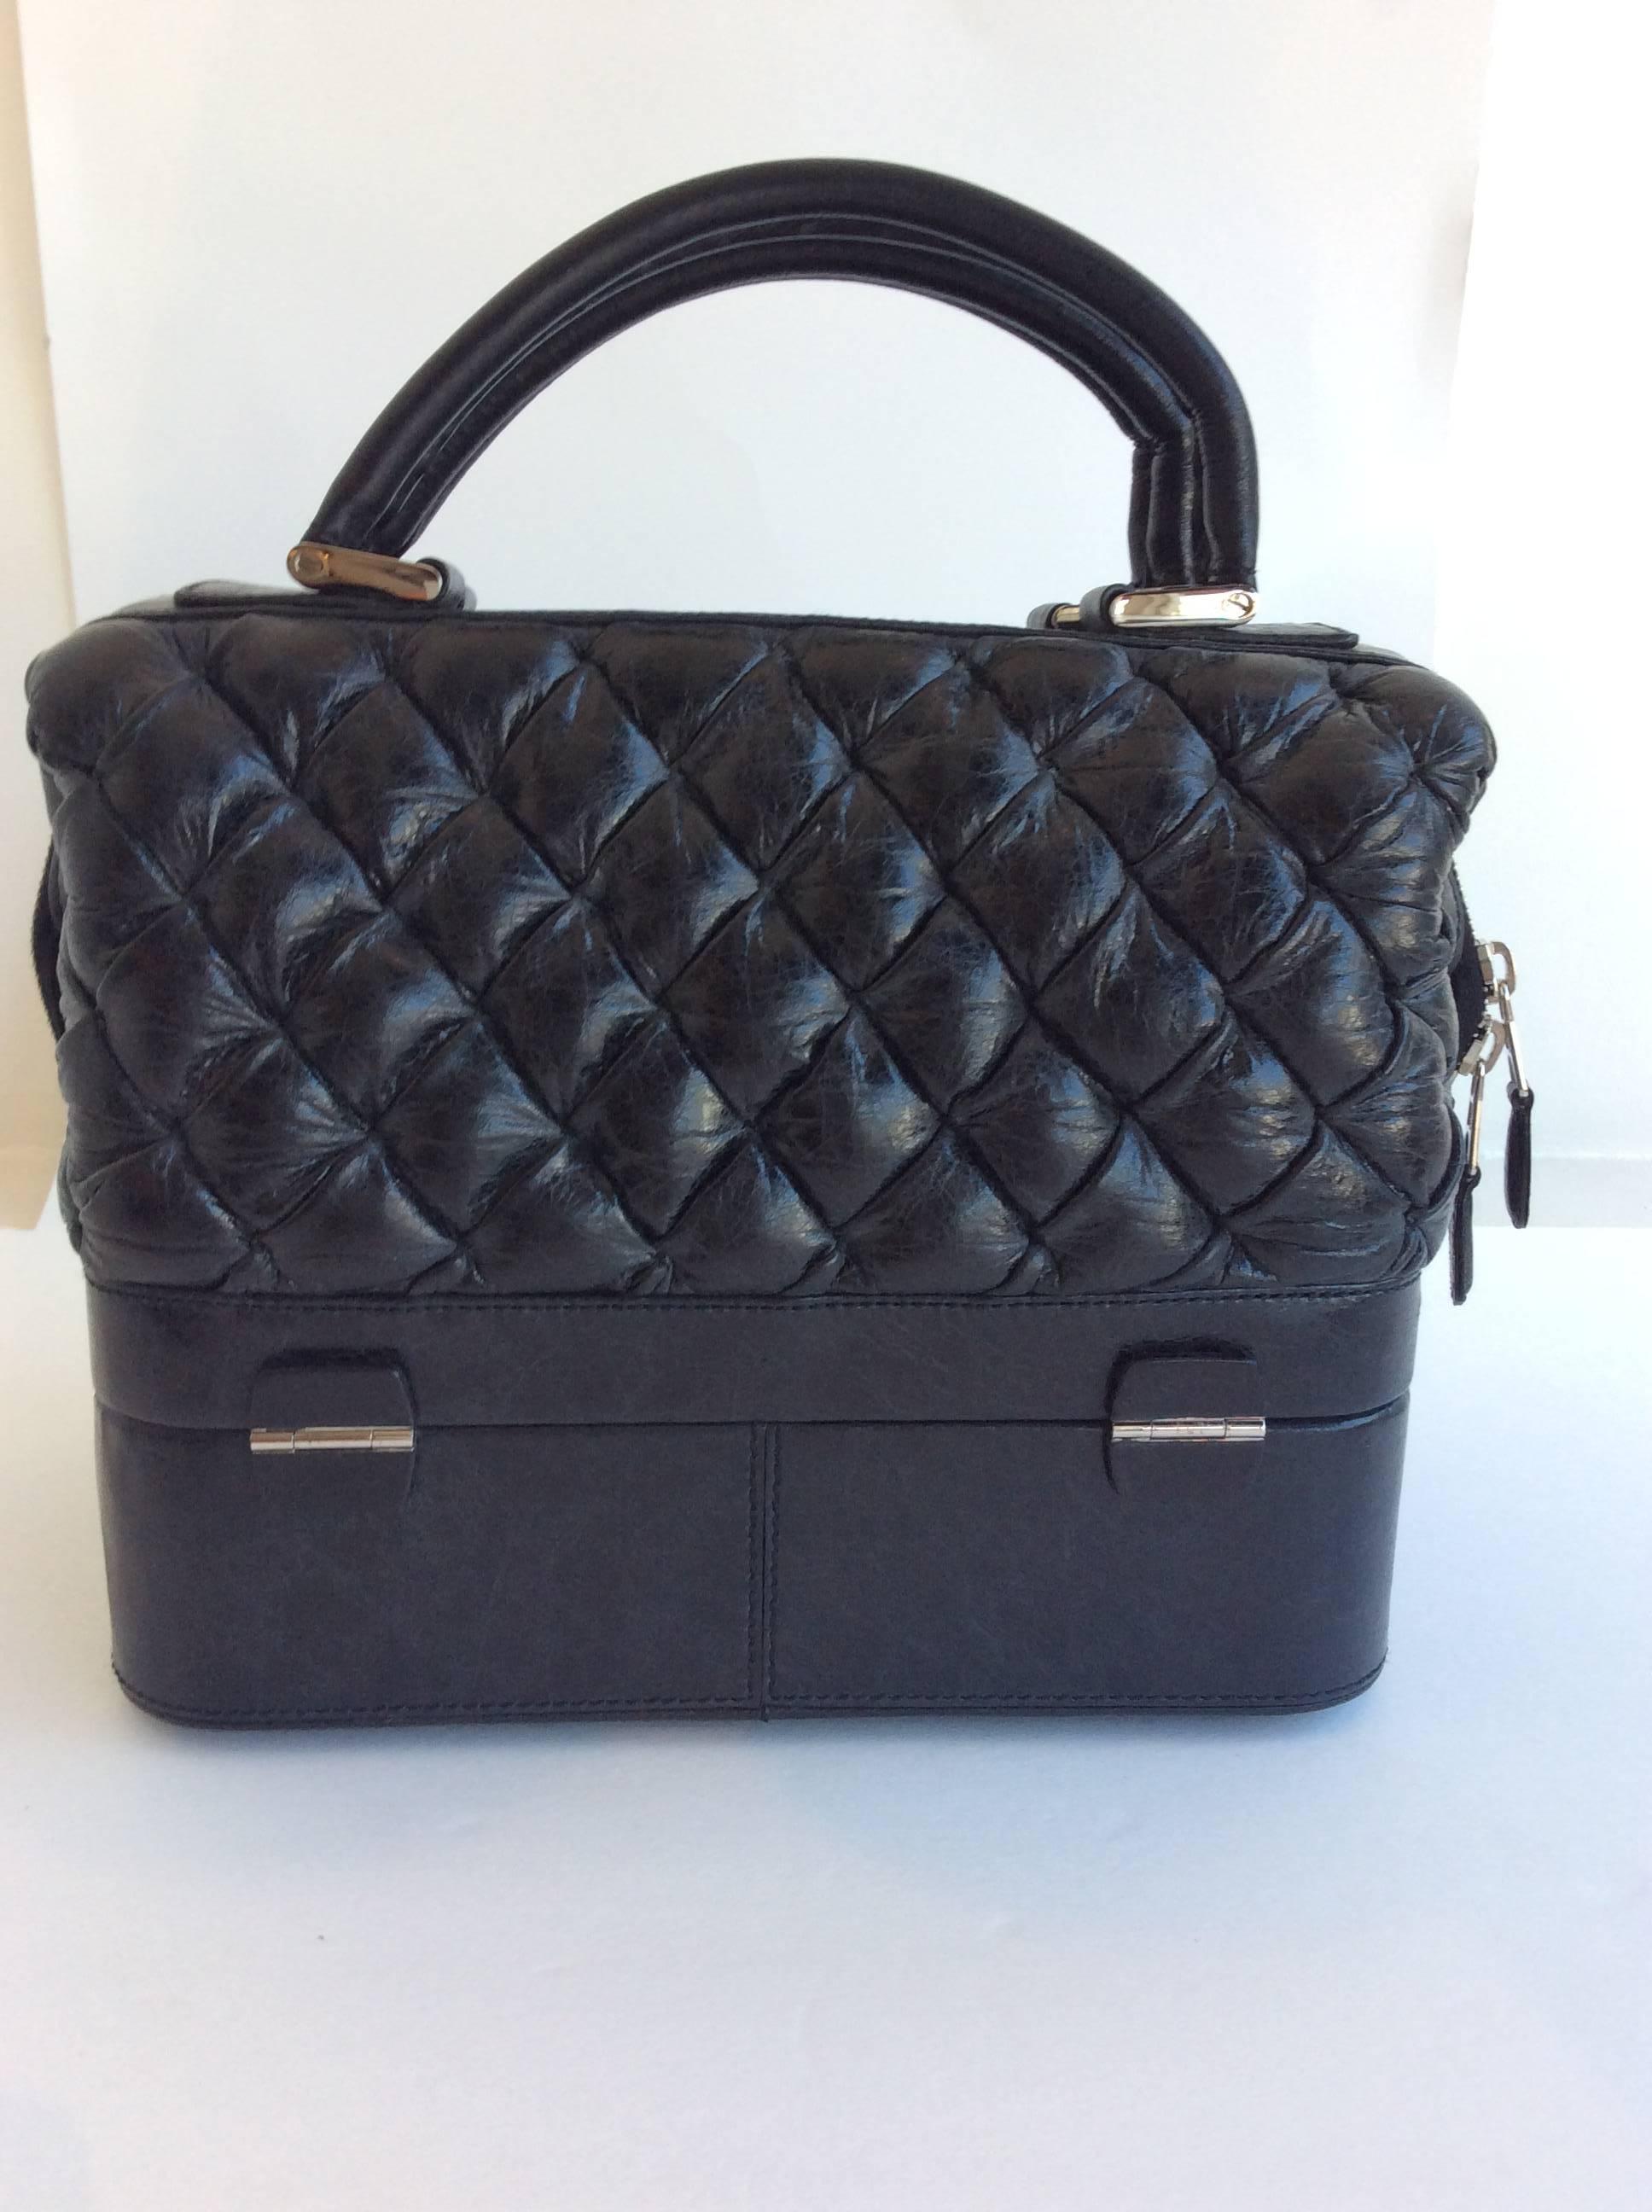 Balenciaga black leather quilted bag with silver hardware. Easy to carry with two leather handle straps. Has deep compartment up top which zips, as well as opens on the bottom with two silver snap buckles. Attached is a small mirror tucked inside a